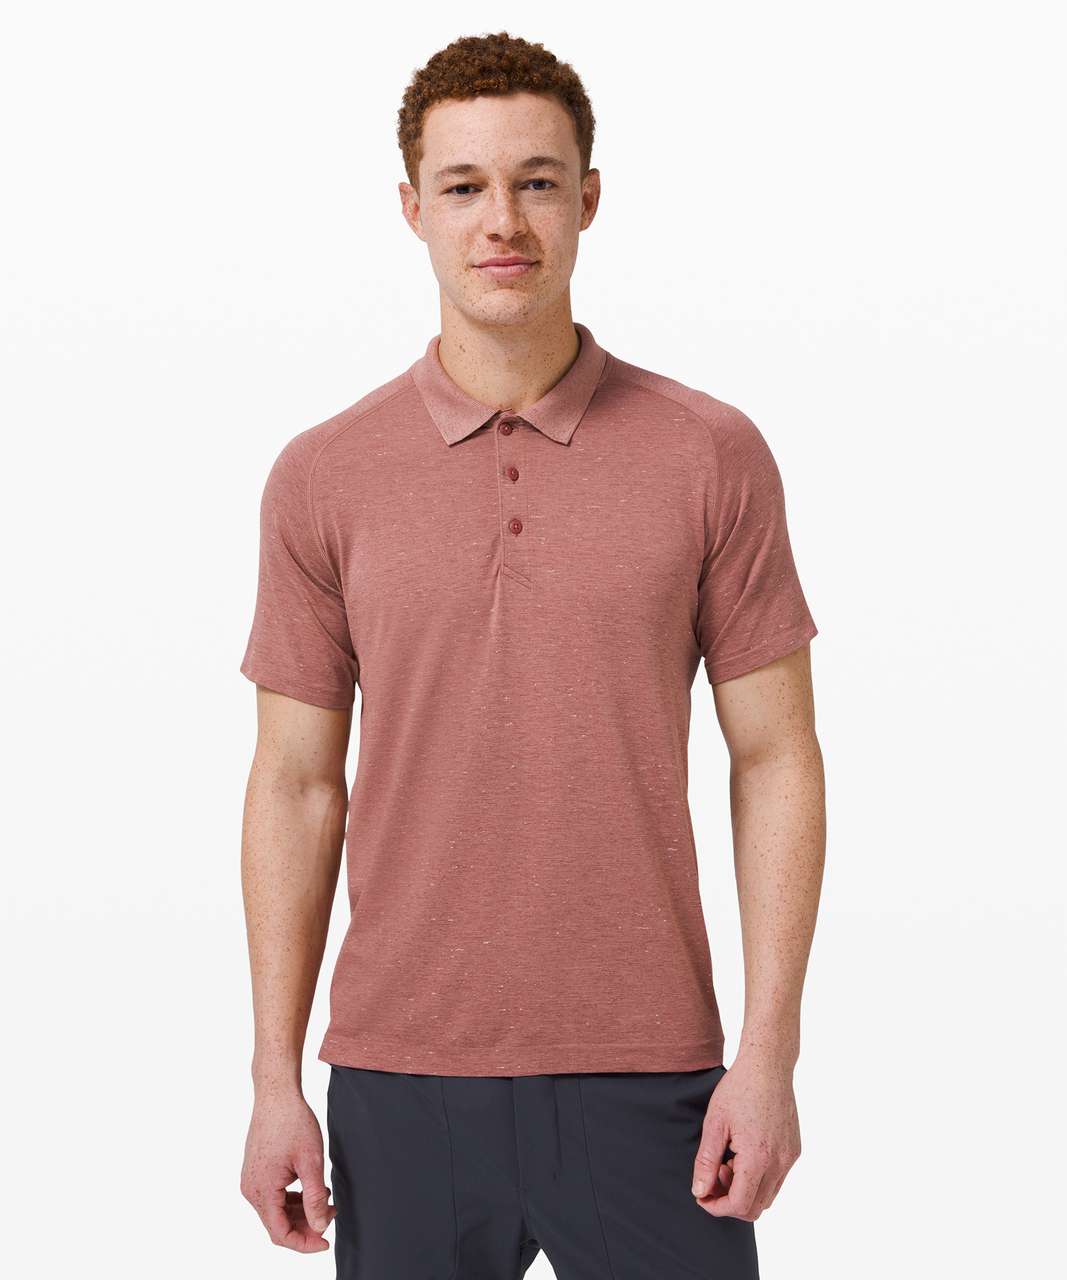 Lululemon Metal Vent Tech Polo 2.0 - Cosmic Shift / Smoky Red / White / Chalky Rose